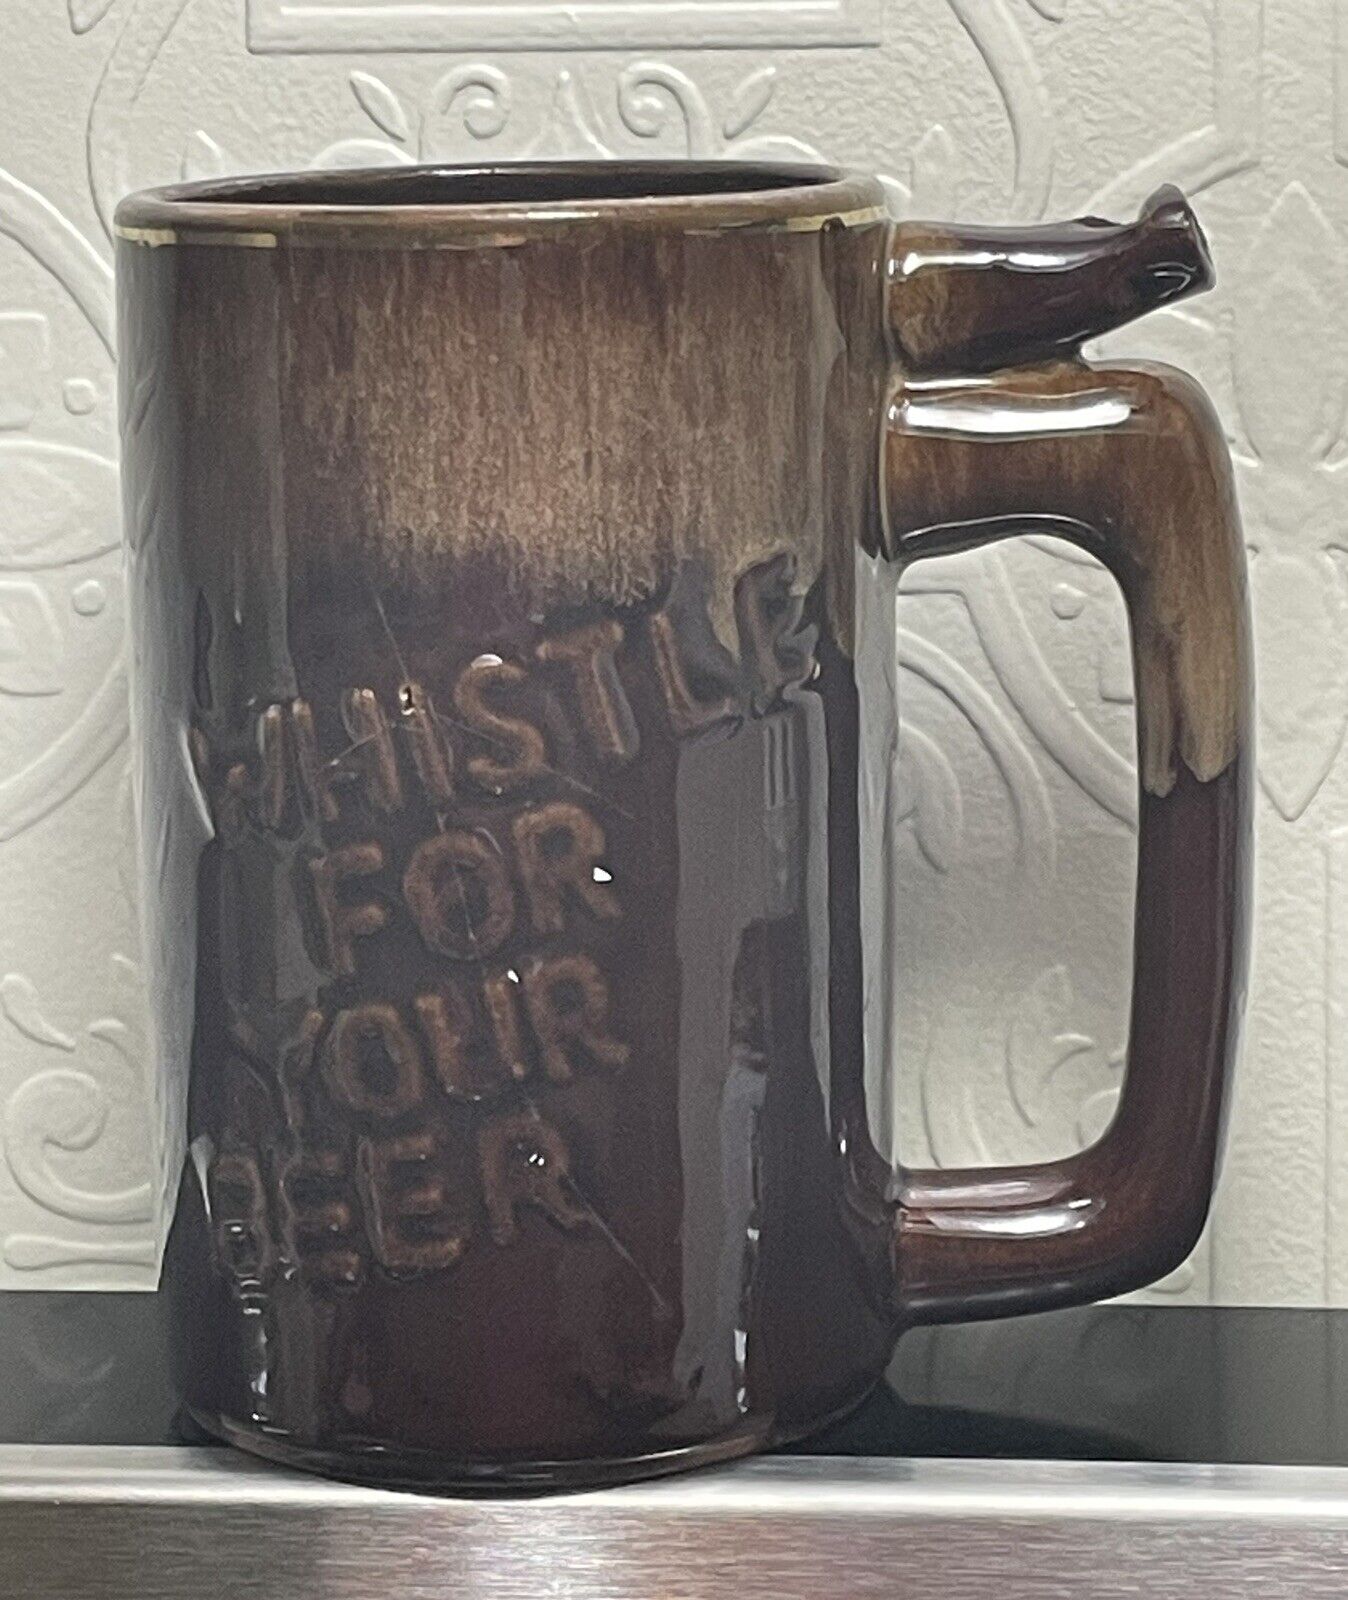 Vintage 1970s Wet Your Whistle Whistle For Your Beer Brown Ceramic Mug Cup Glaze